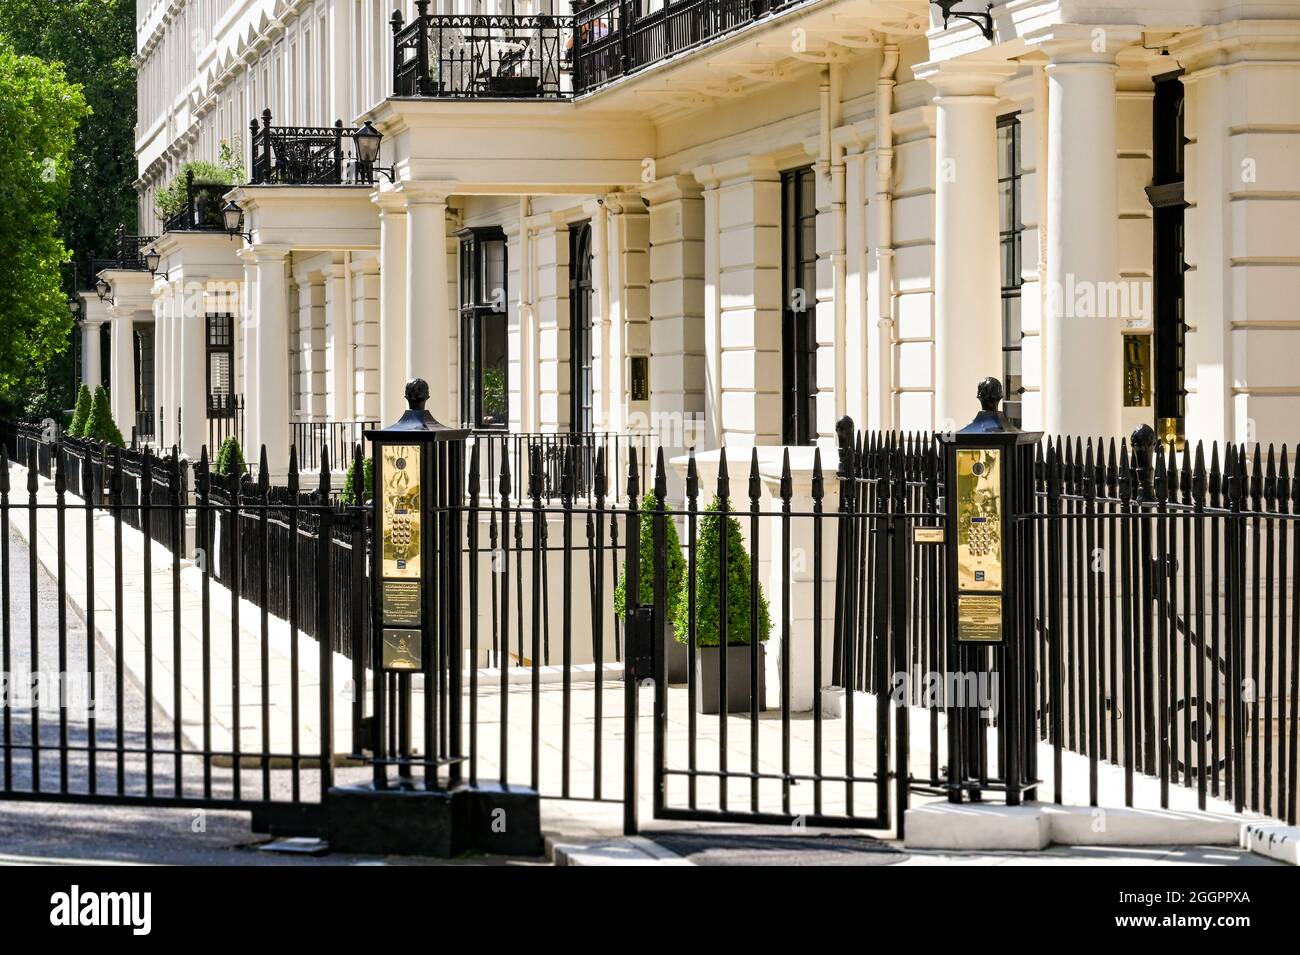 London, England - August 2021: Pedestrian gate with secure access buttons outside a terrace of townhouses overlooking Hyde Park Stock Photo